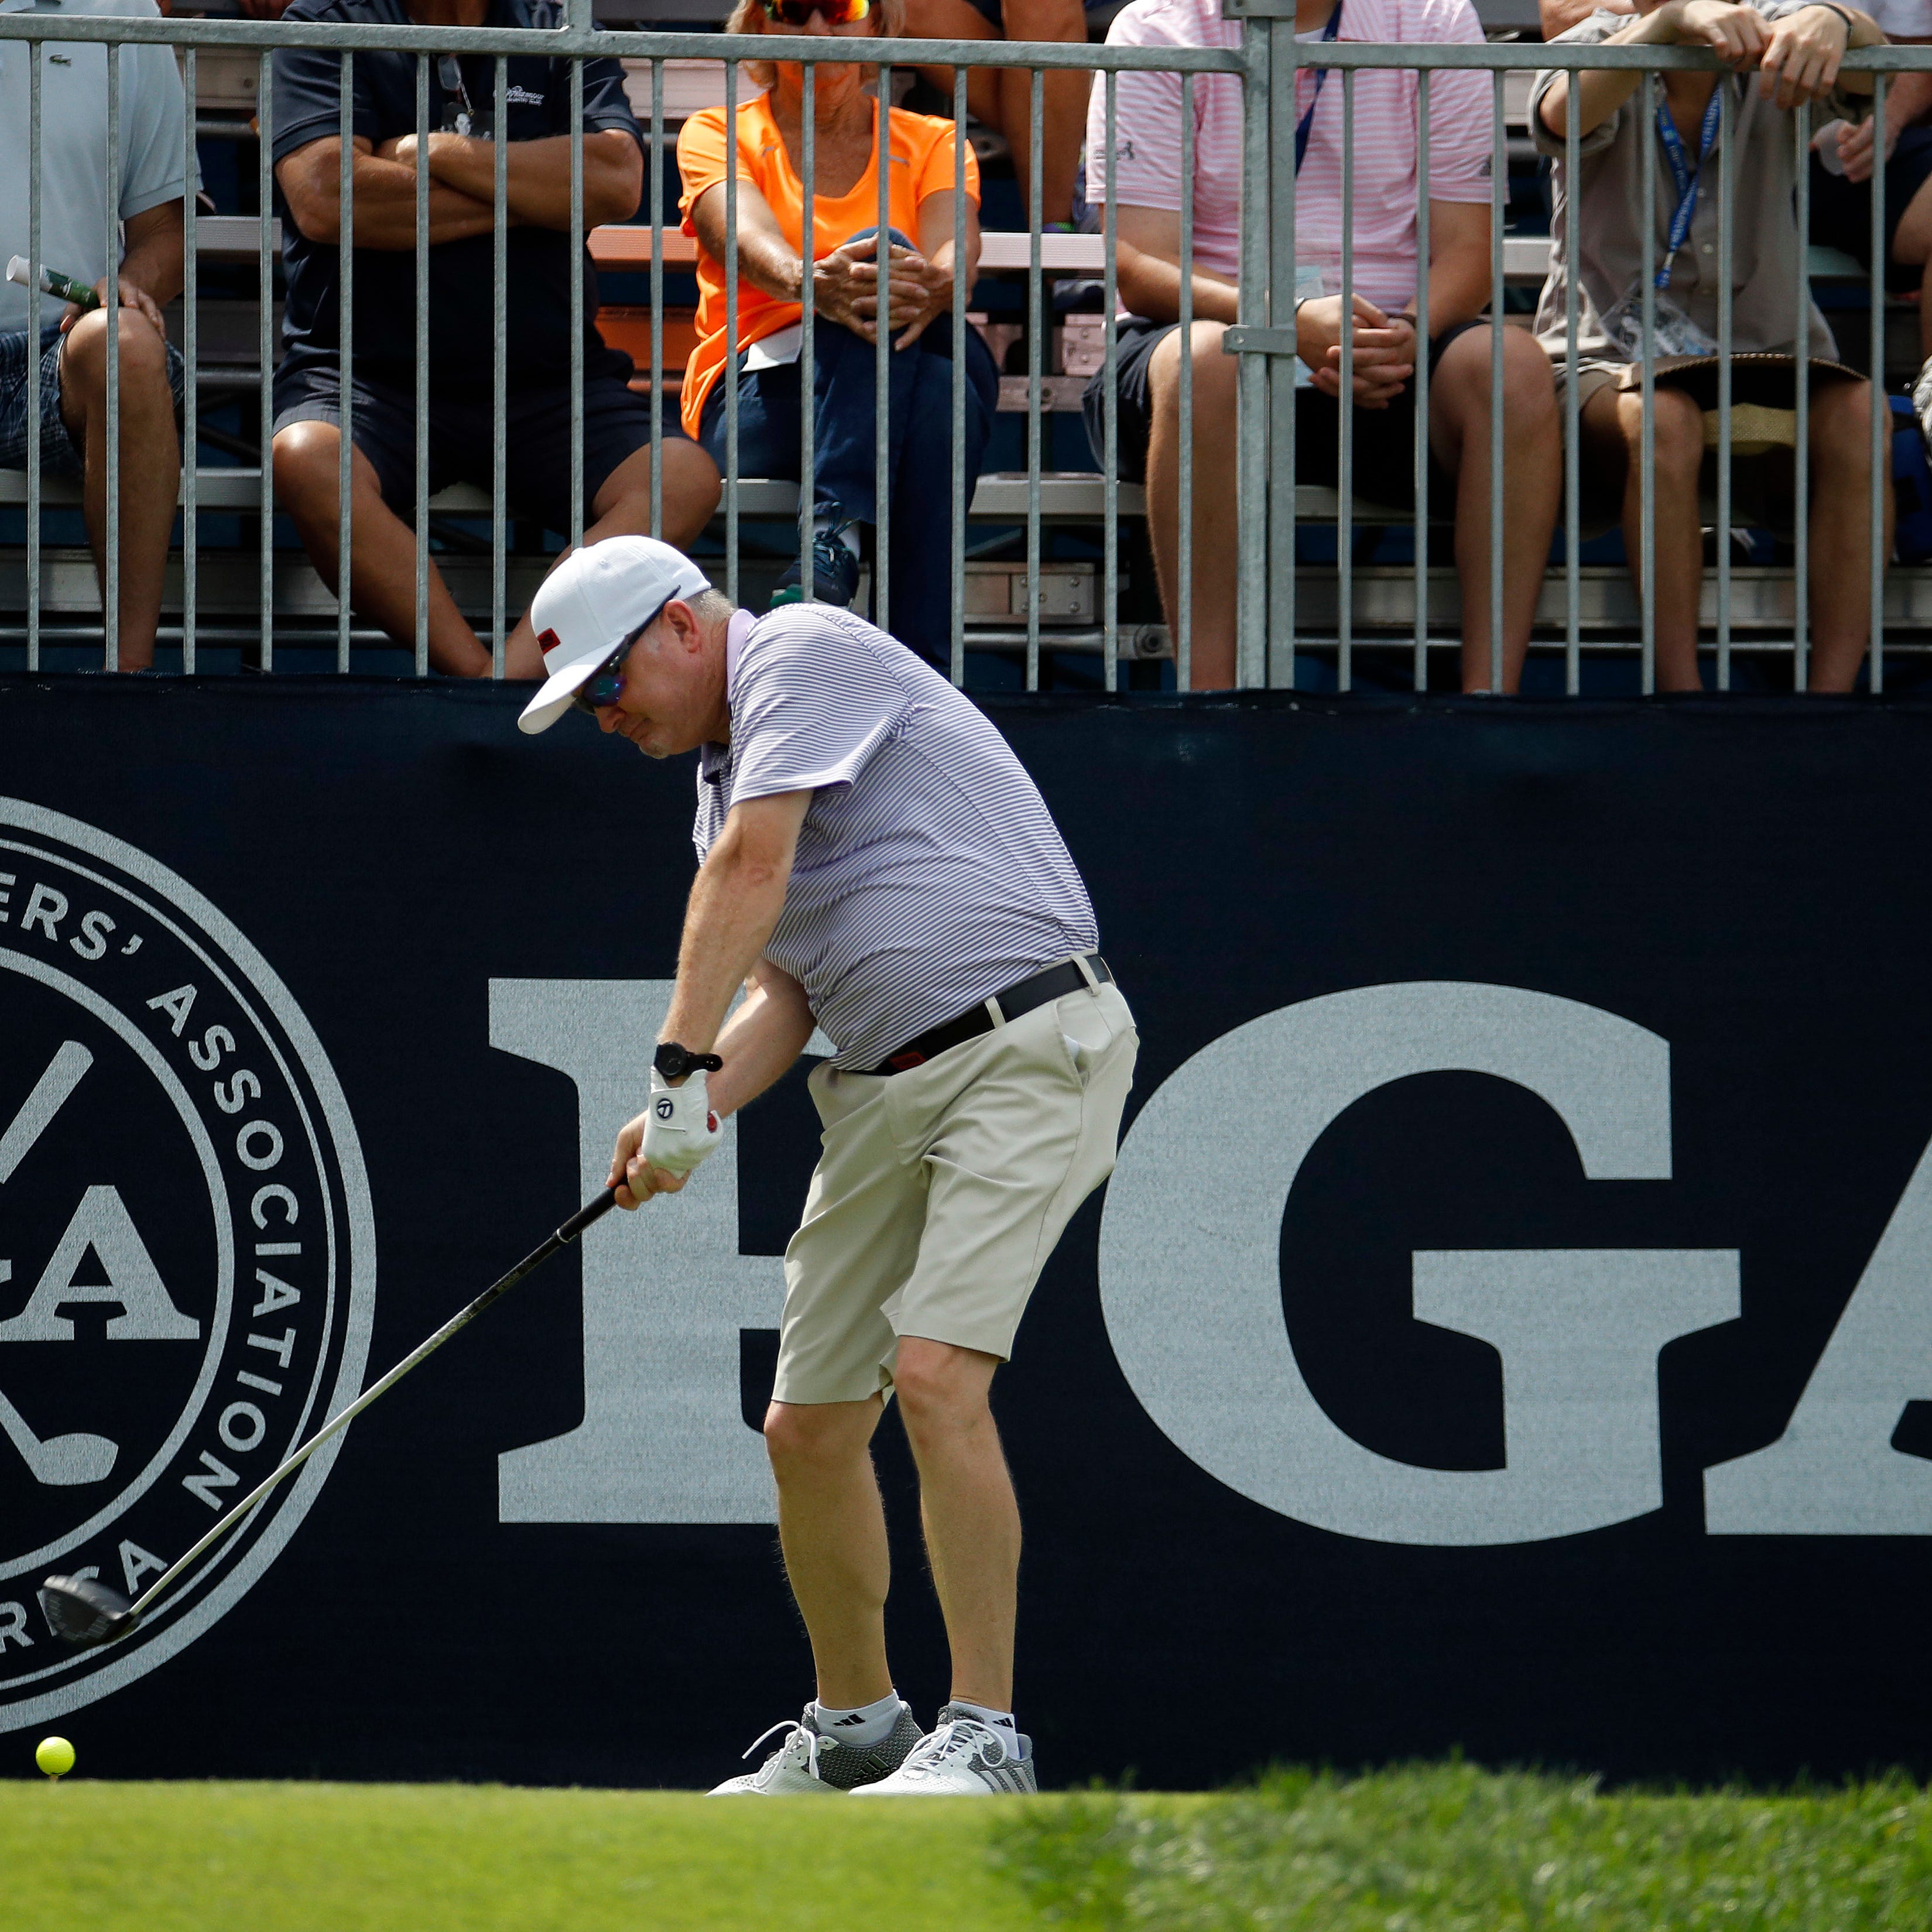 Craig Bowden hits on the driving range during a practice round for the PGA Championship golf tournament at Bellerive Country Club, Wednesday, Aug. 8, 2018, in St. Louis. (AP Photo/Charlie Riedel)